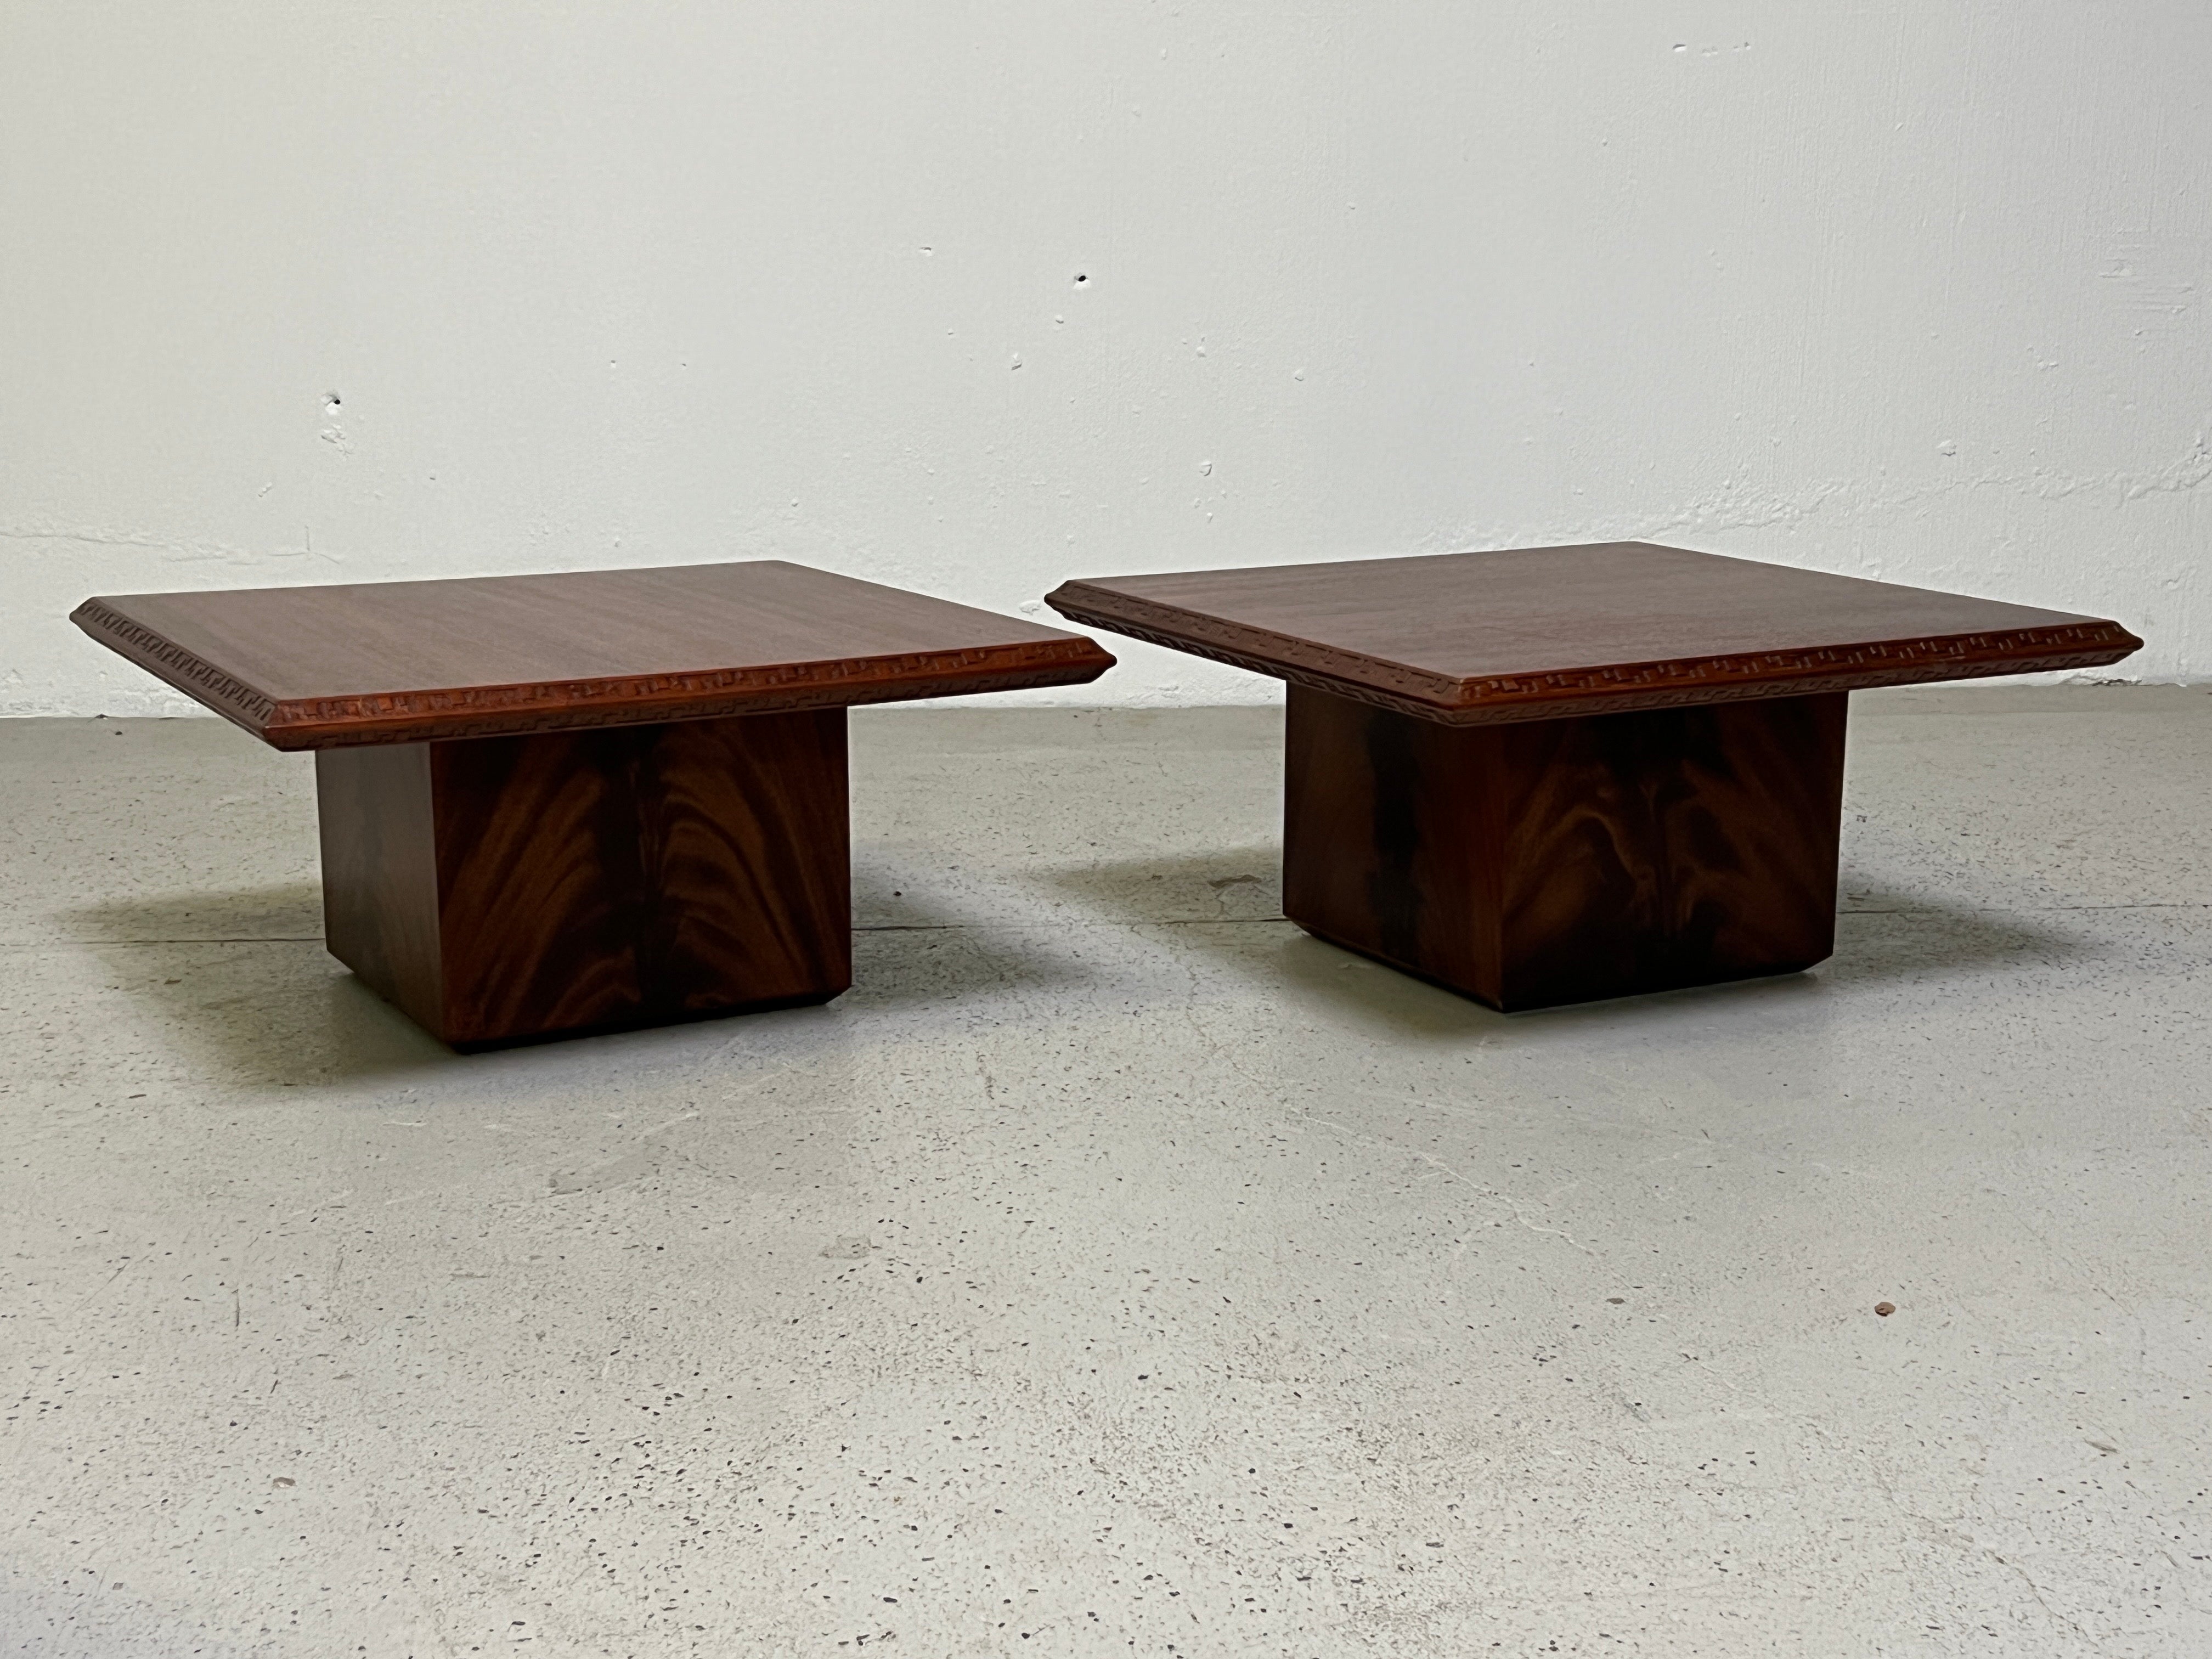 A pair of mahogany tables designed by Frank Lloyd Wright for Henredon.